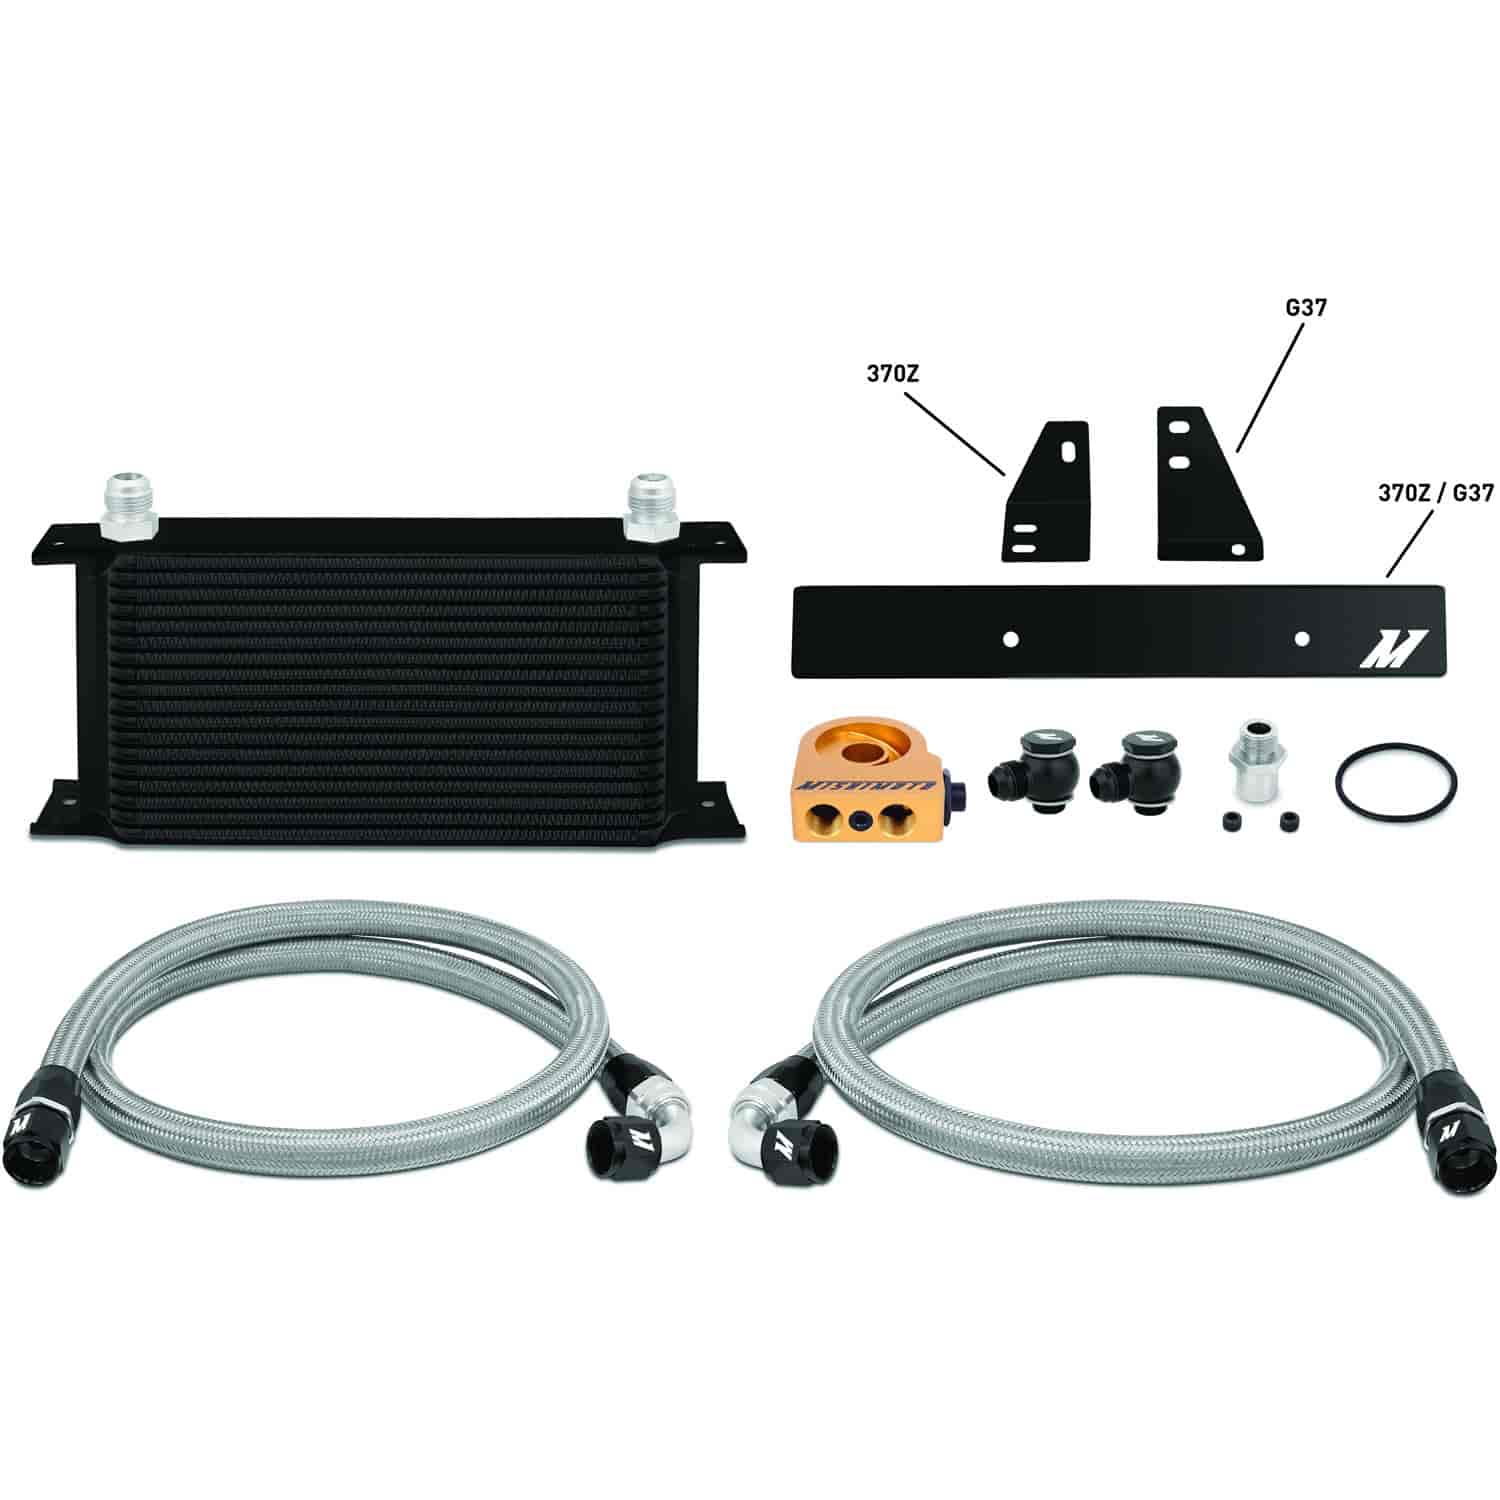 Nissan 370Z/ Infiniti G37 Coupe only Thermostatic Oil Cooler Kit Black - MFG Part No. MMOC-370Z-09TBK